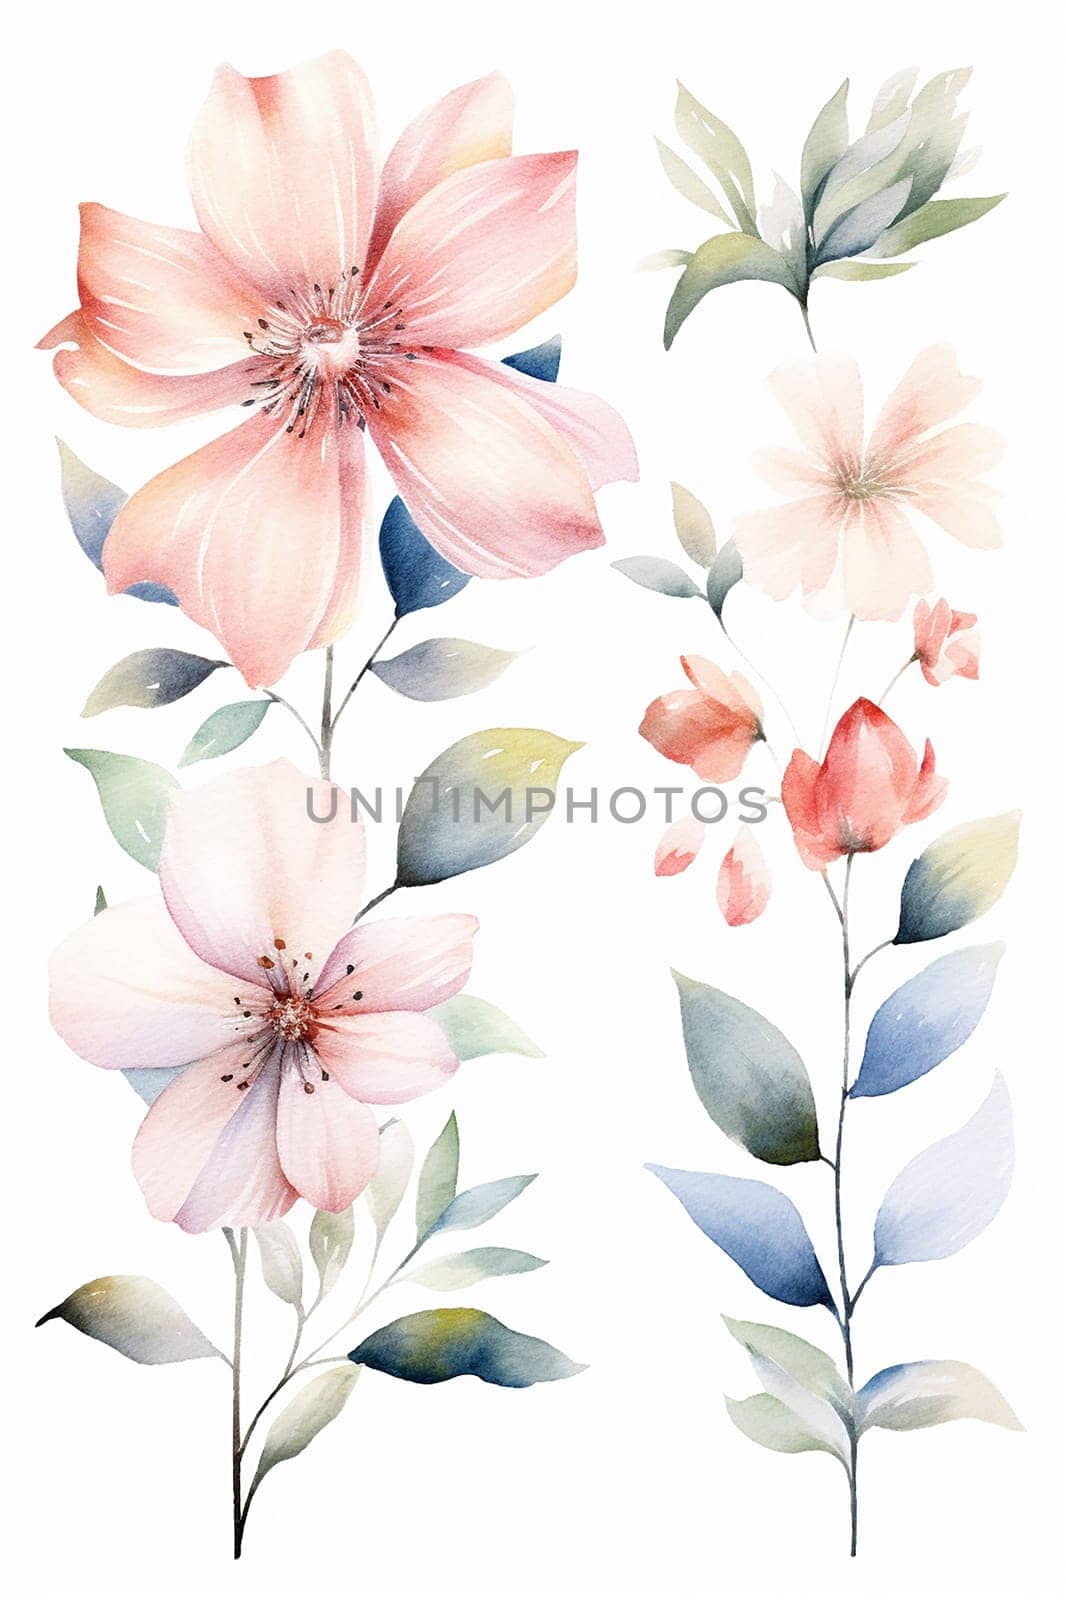 Elegant watercolor painting of delicate flowers and leaves.